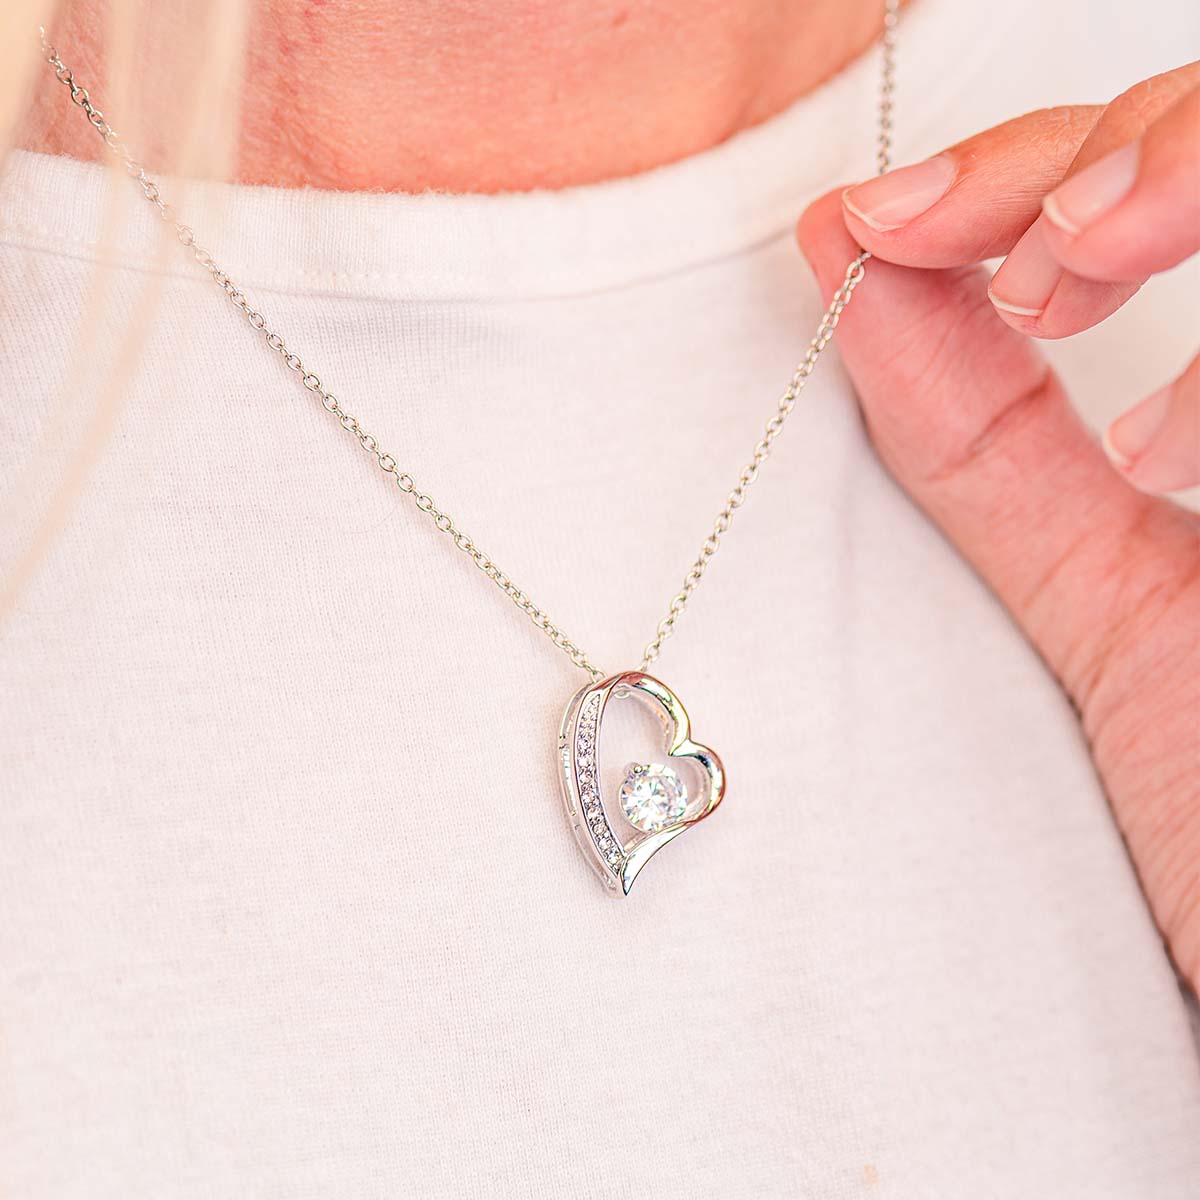 ShineOn Fulfillment Jewelry To my Daughter-In-Law - My Bonus Daughter - Forever Love Necklace